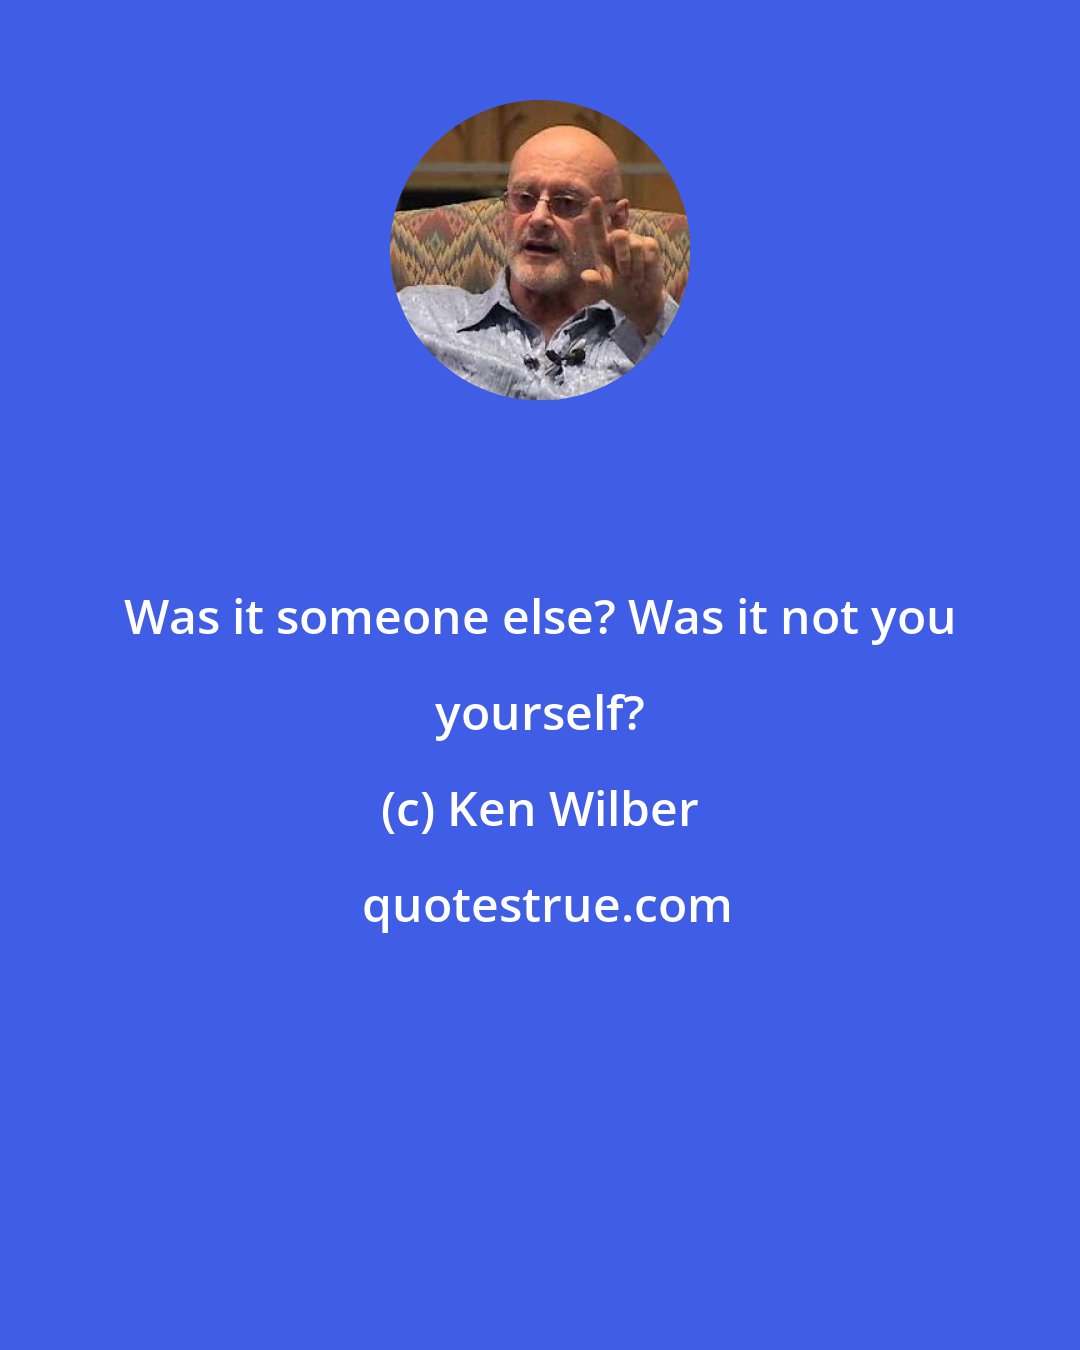 Ken Wilber: Was it someone else? Was it not you yourself?